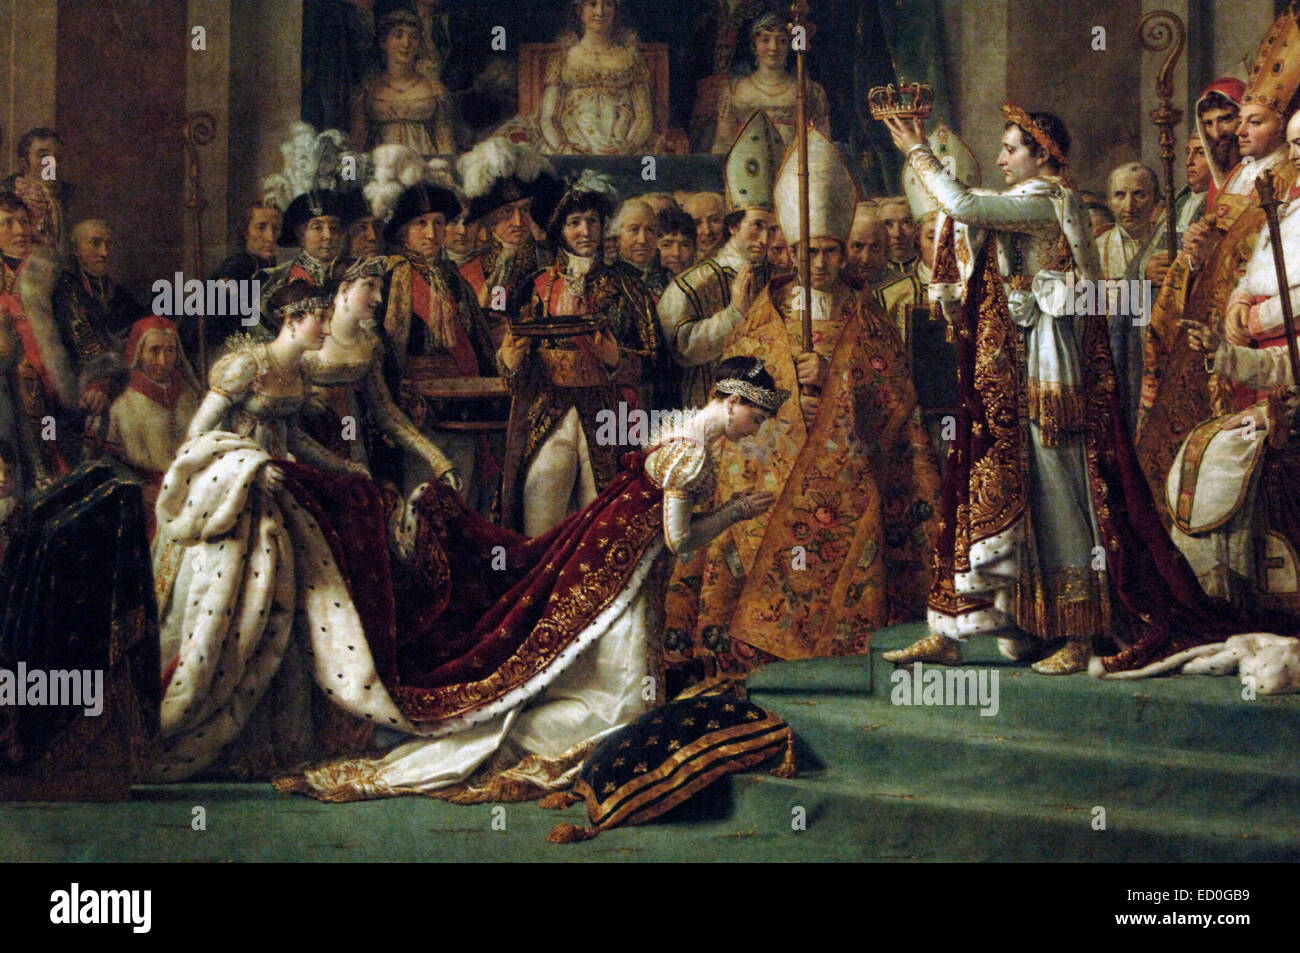 The Consecration of the Emperor Napoleon and the Coronation of Empress Josephine on December 2, 1804, by  French painter Jacques Louis David (1748-1825). Museum of Louvre. Paris. France. Stock Photo